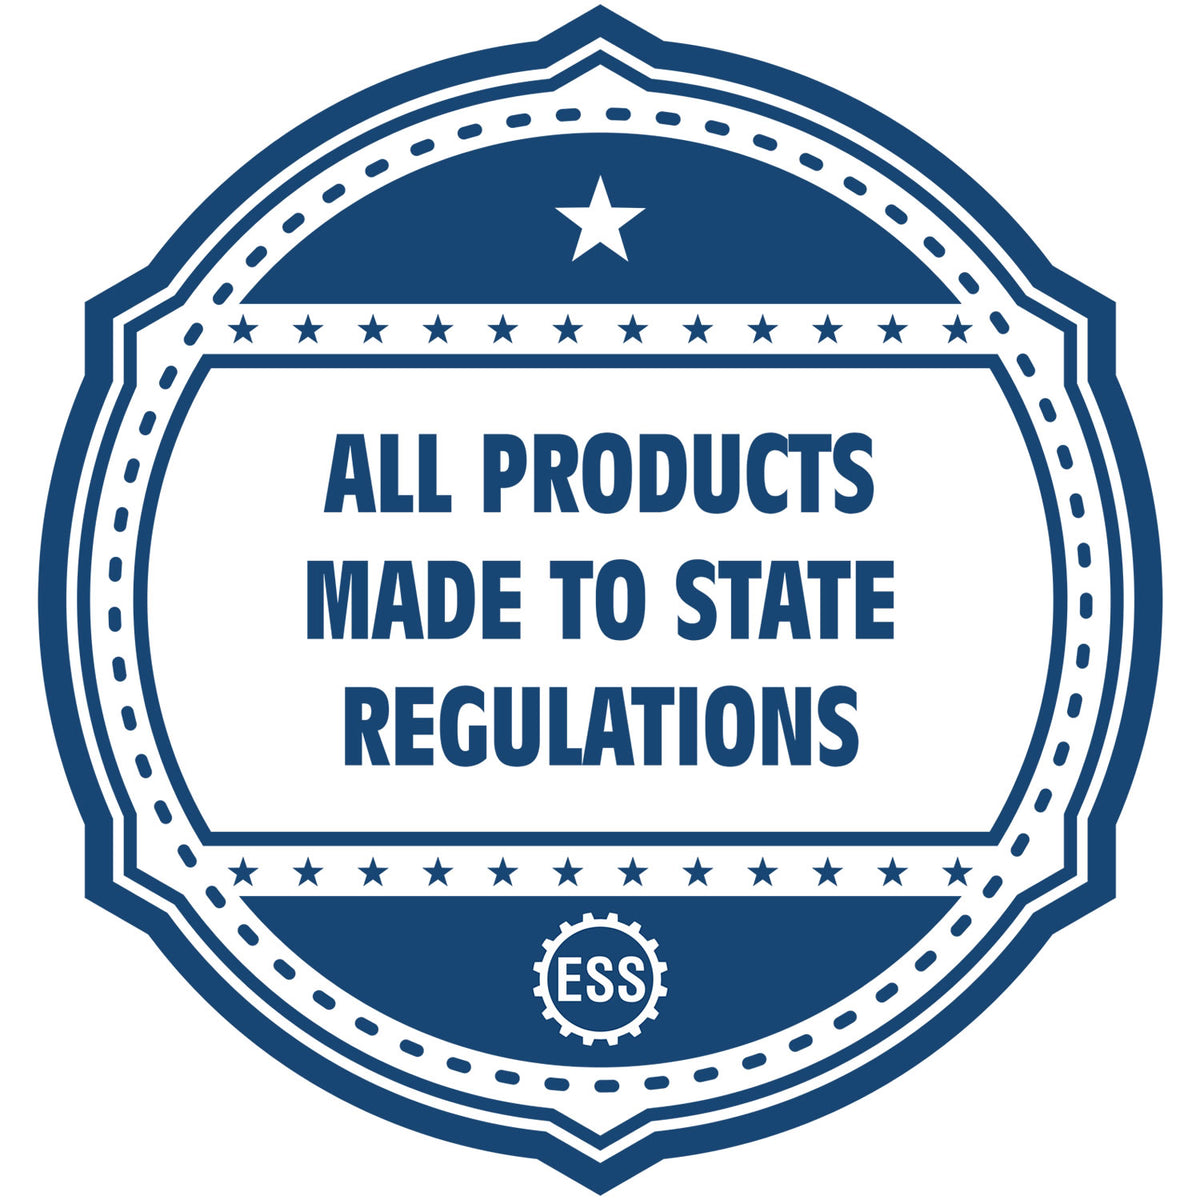 An icon or badge element for the Digital Illinois PE Stamp and Electronic Seal for Illinois Engineer showing that this product is made in compliance with state regulations.